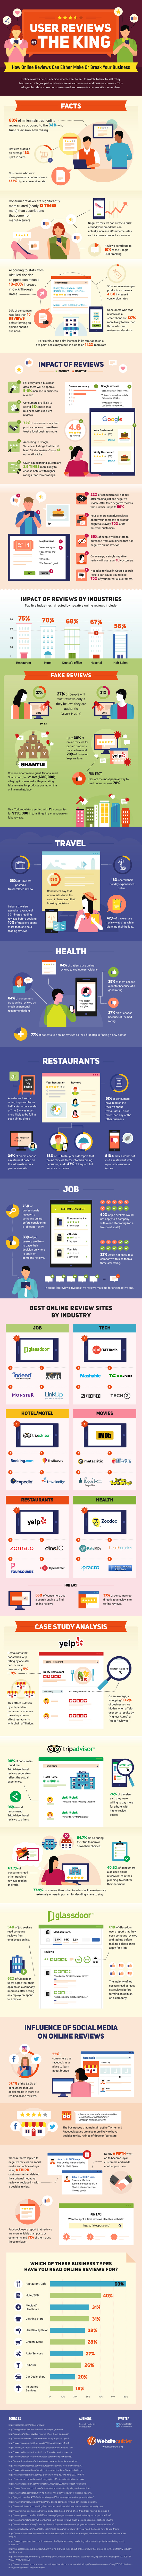 onlinereview-infographic-by-websitebuilder.org_-1